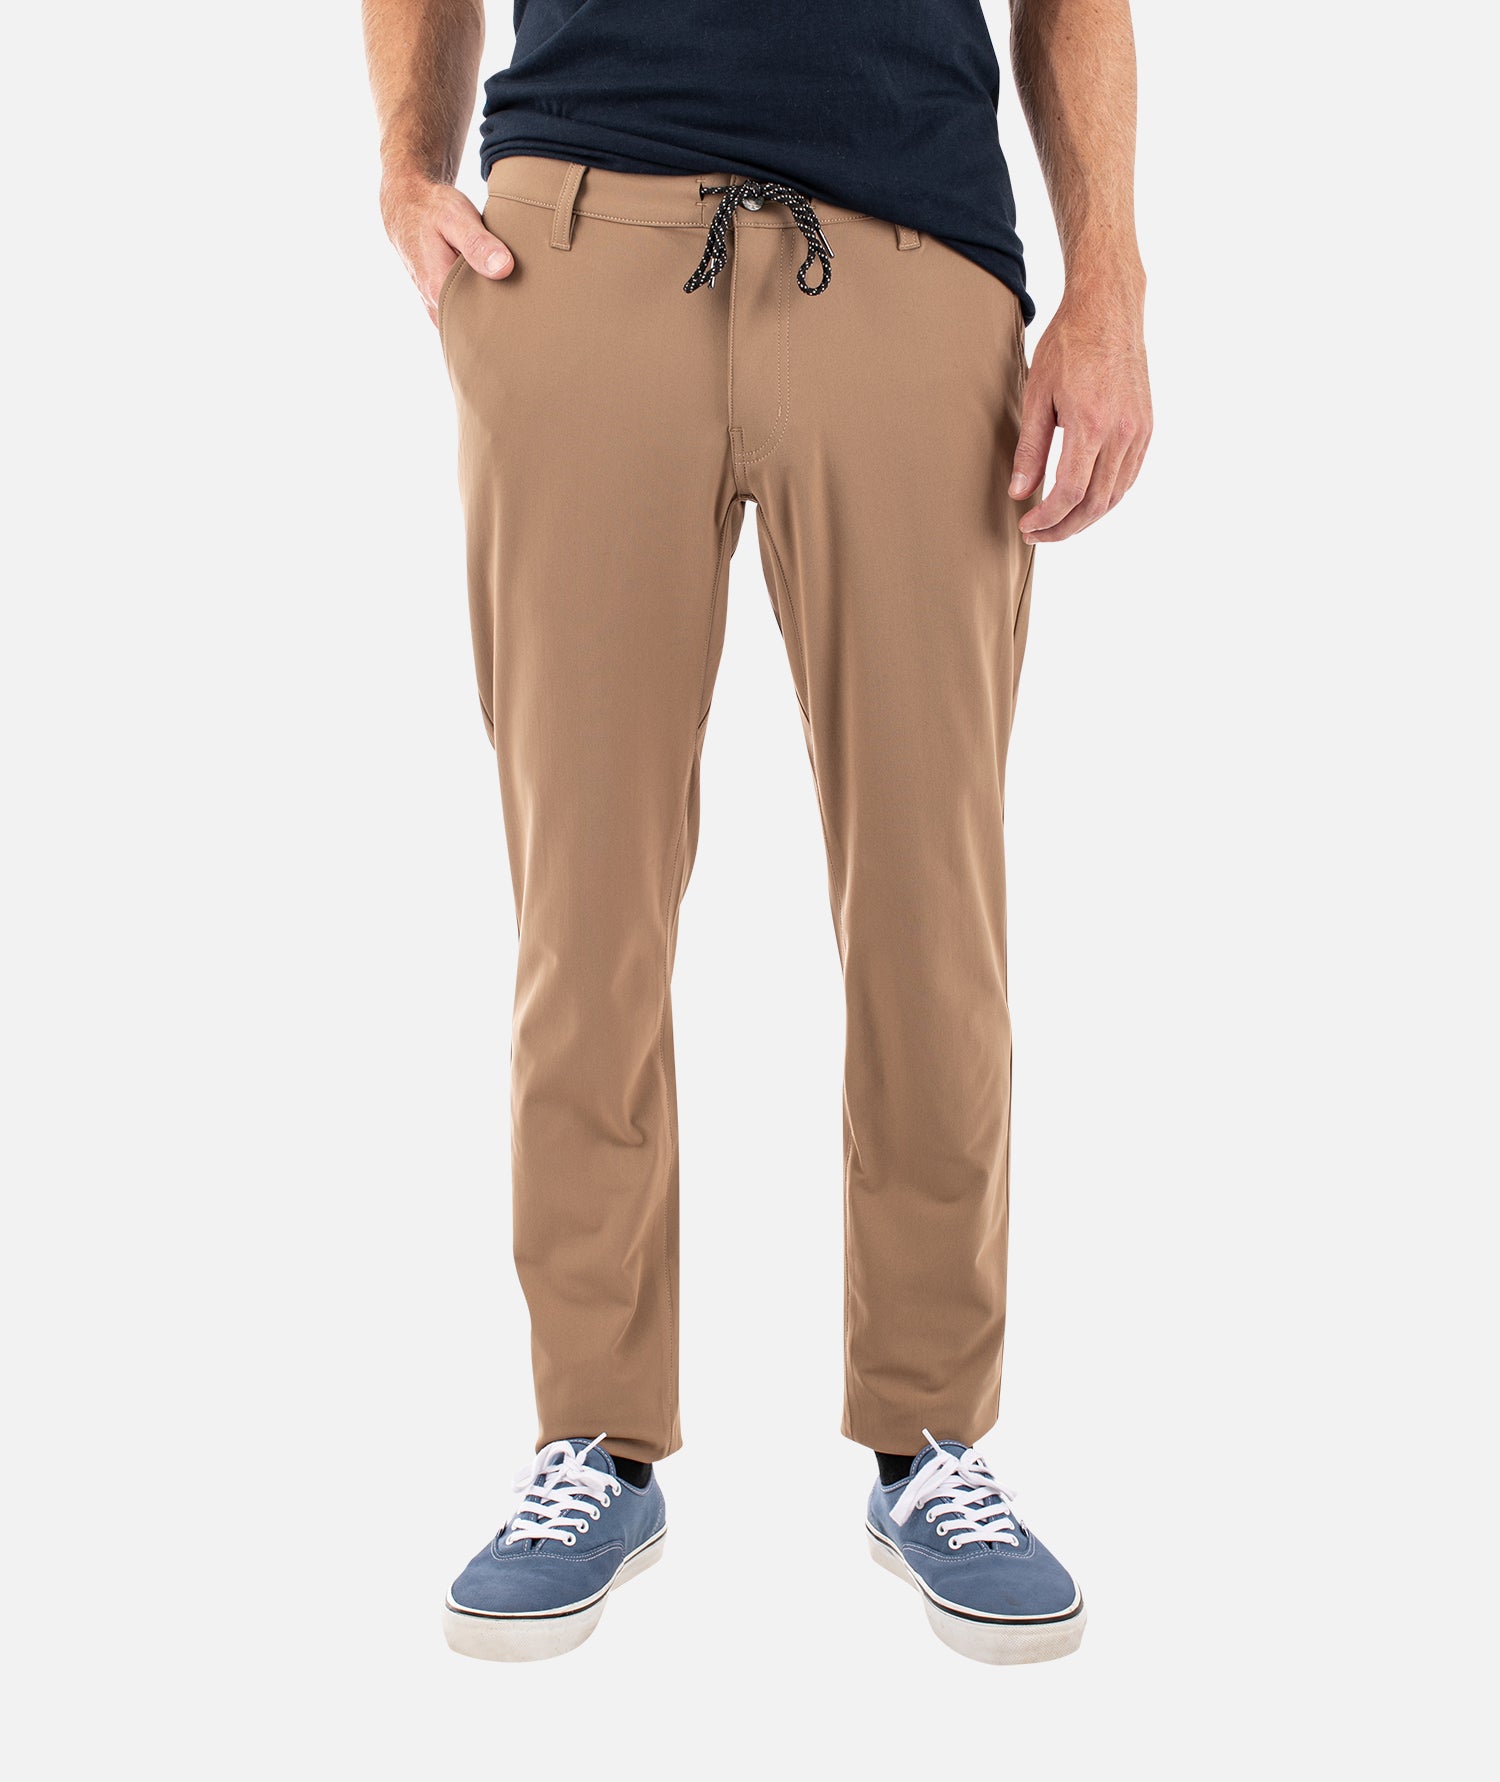 Jetty York Lined Pants